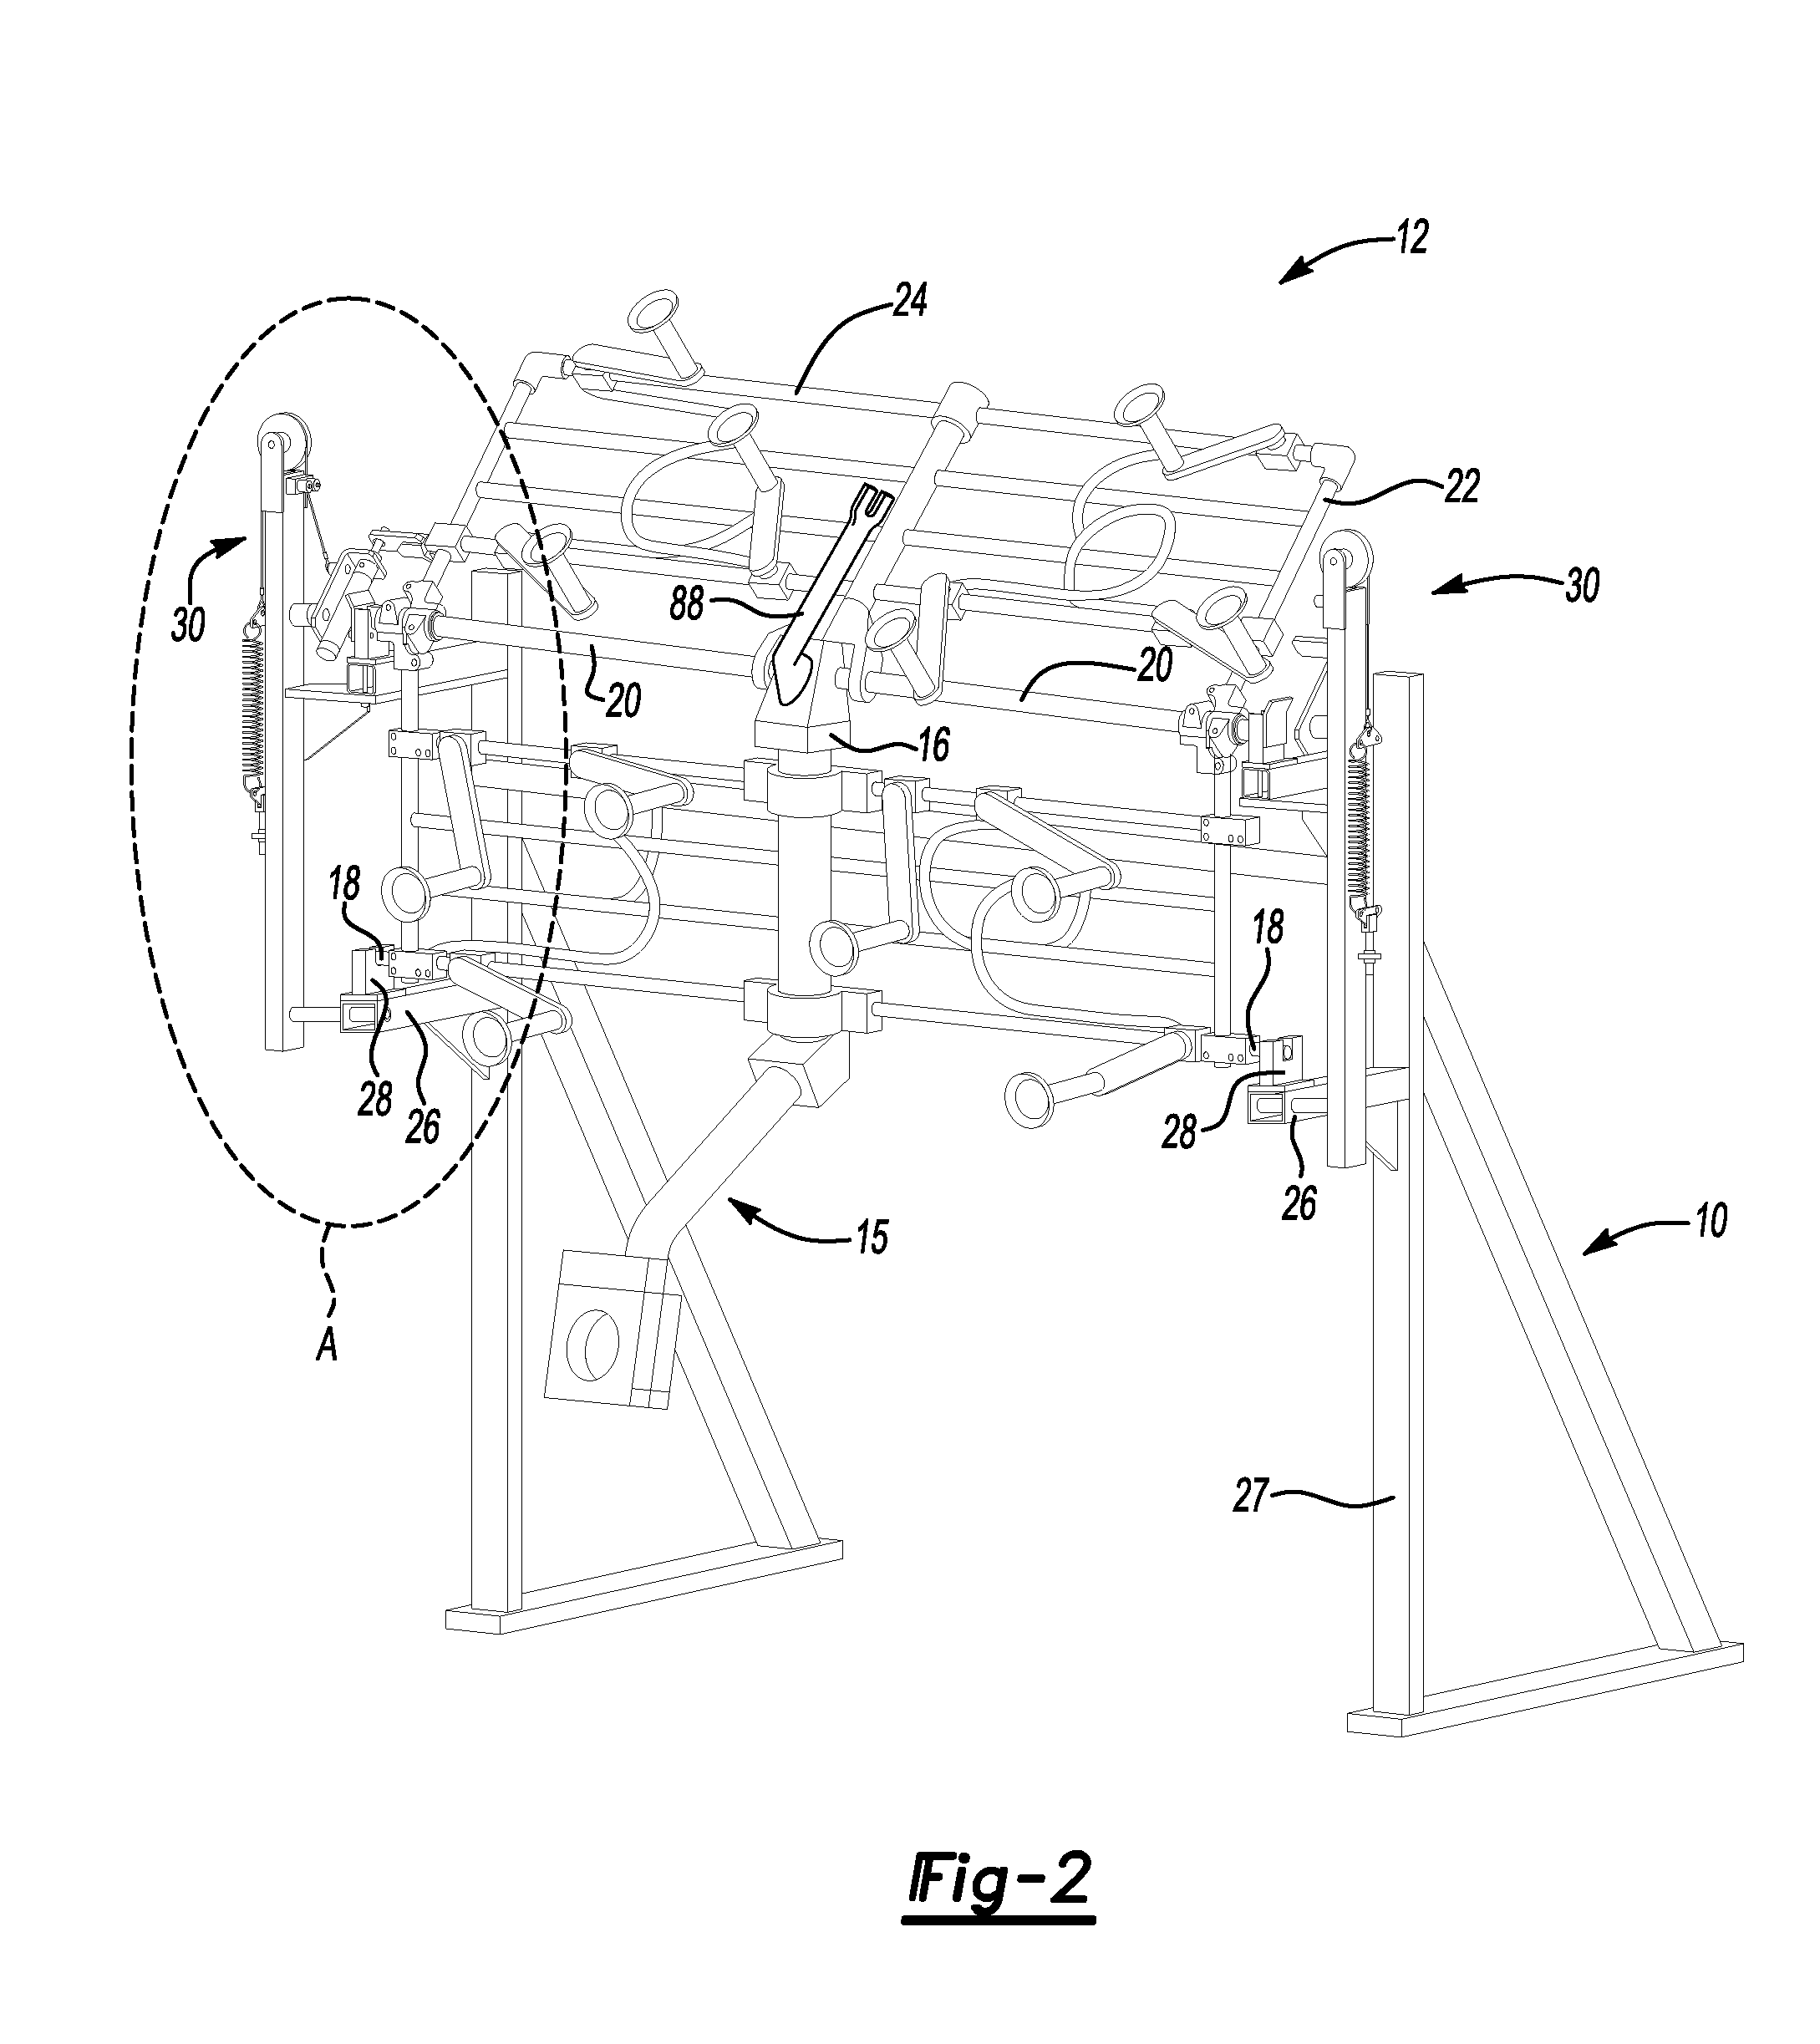 Counterbalance mechanism for end-effector configuration and method of use